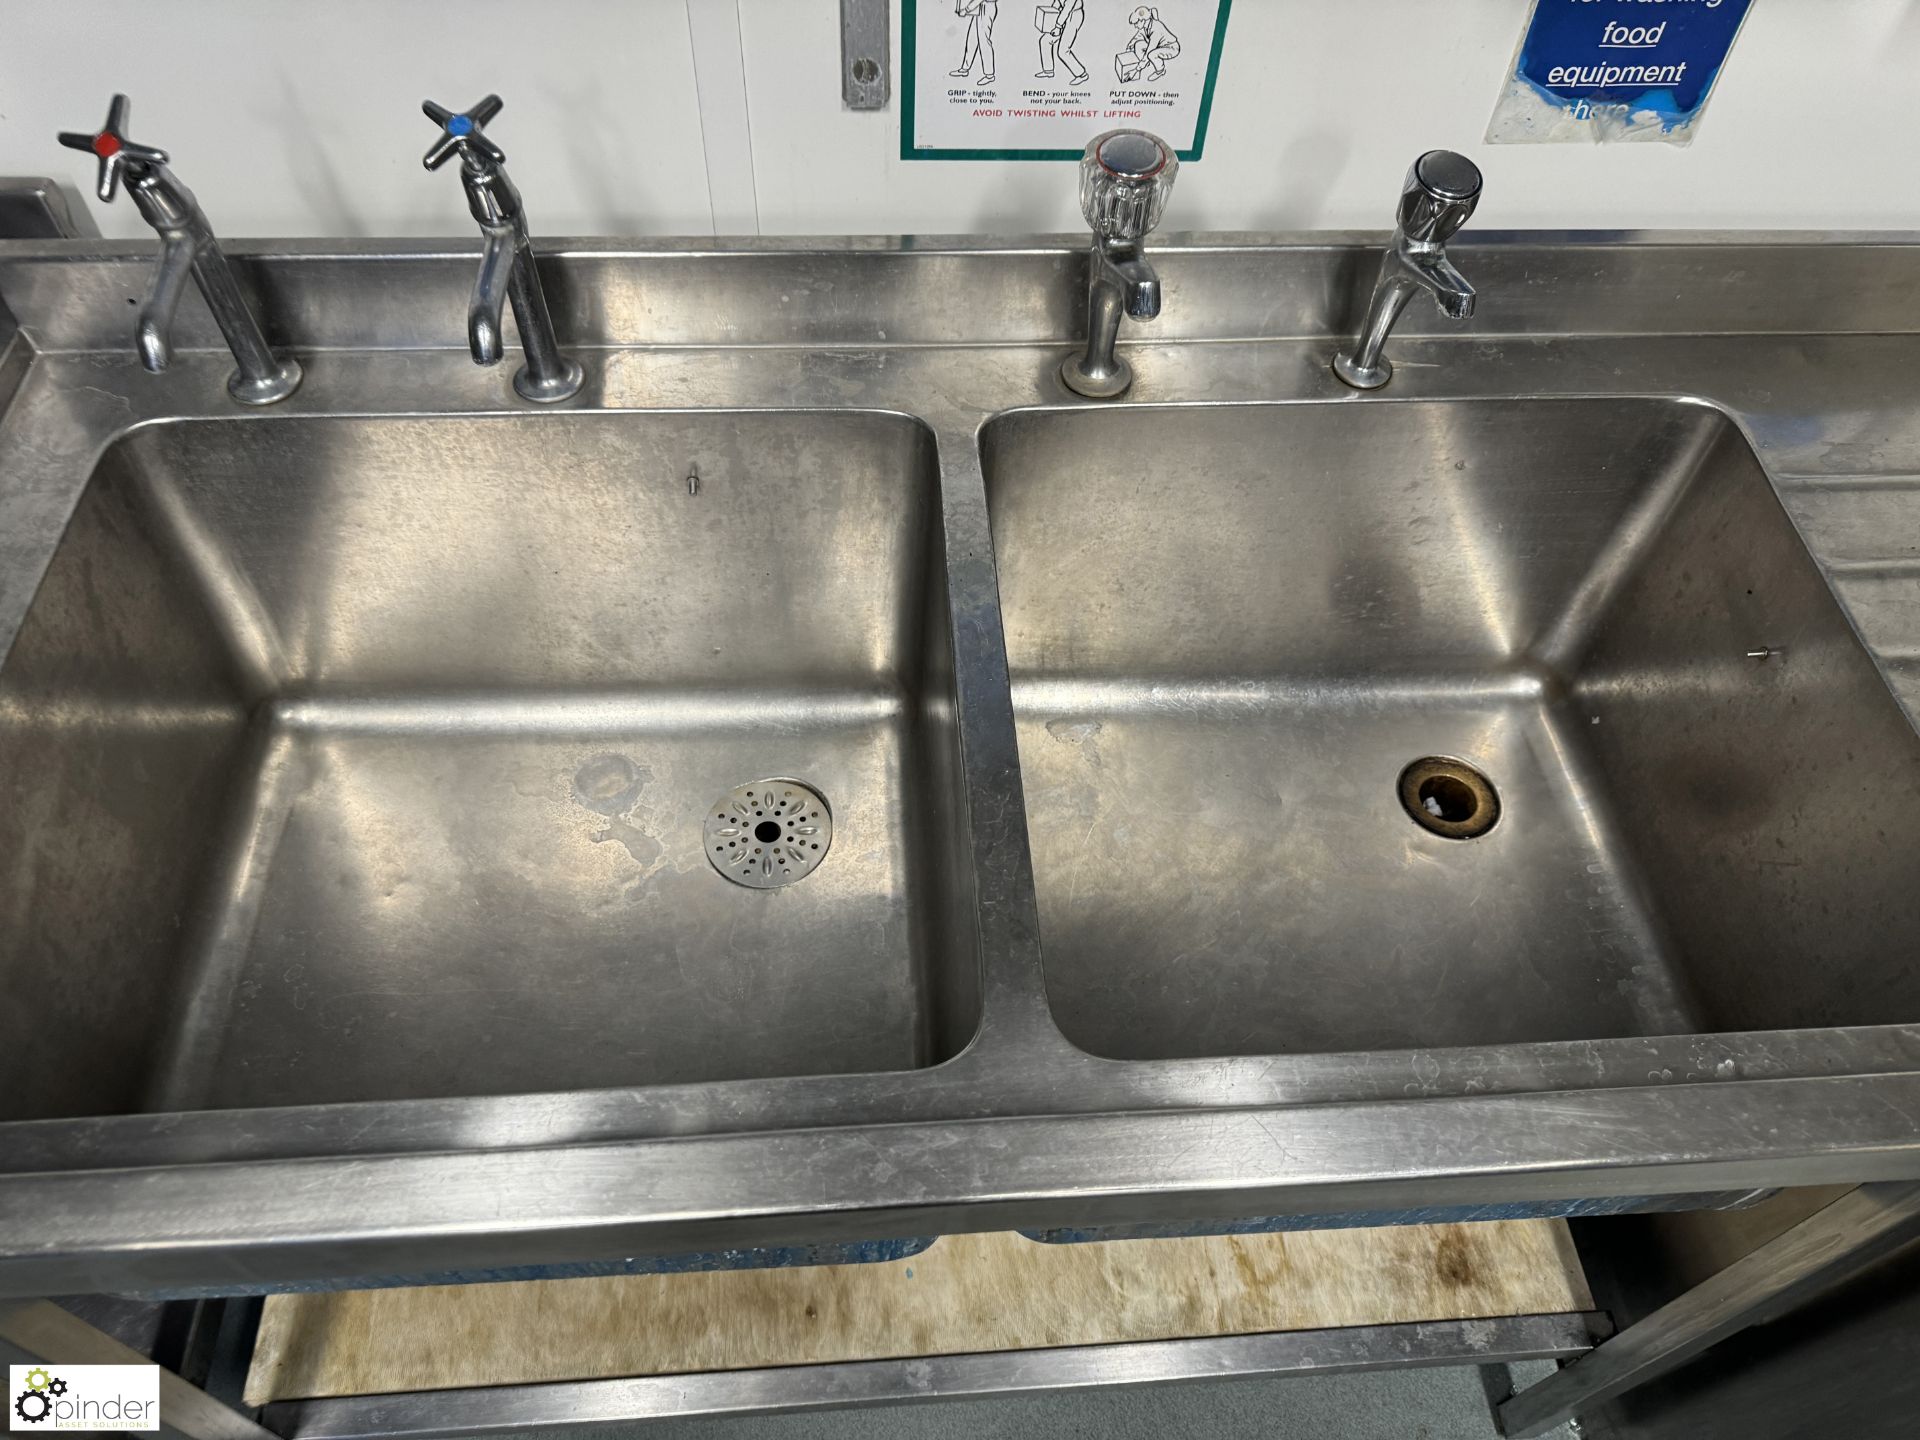 Stainless steel twin bowl Sink, 1850mm x 600mm x 900mm (location in building - level 23 kitchen) - Image 3 of 4